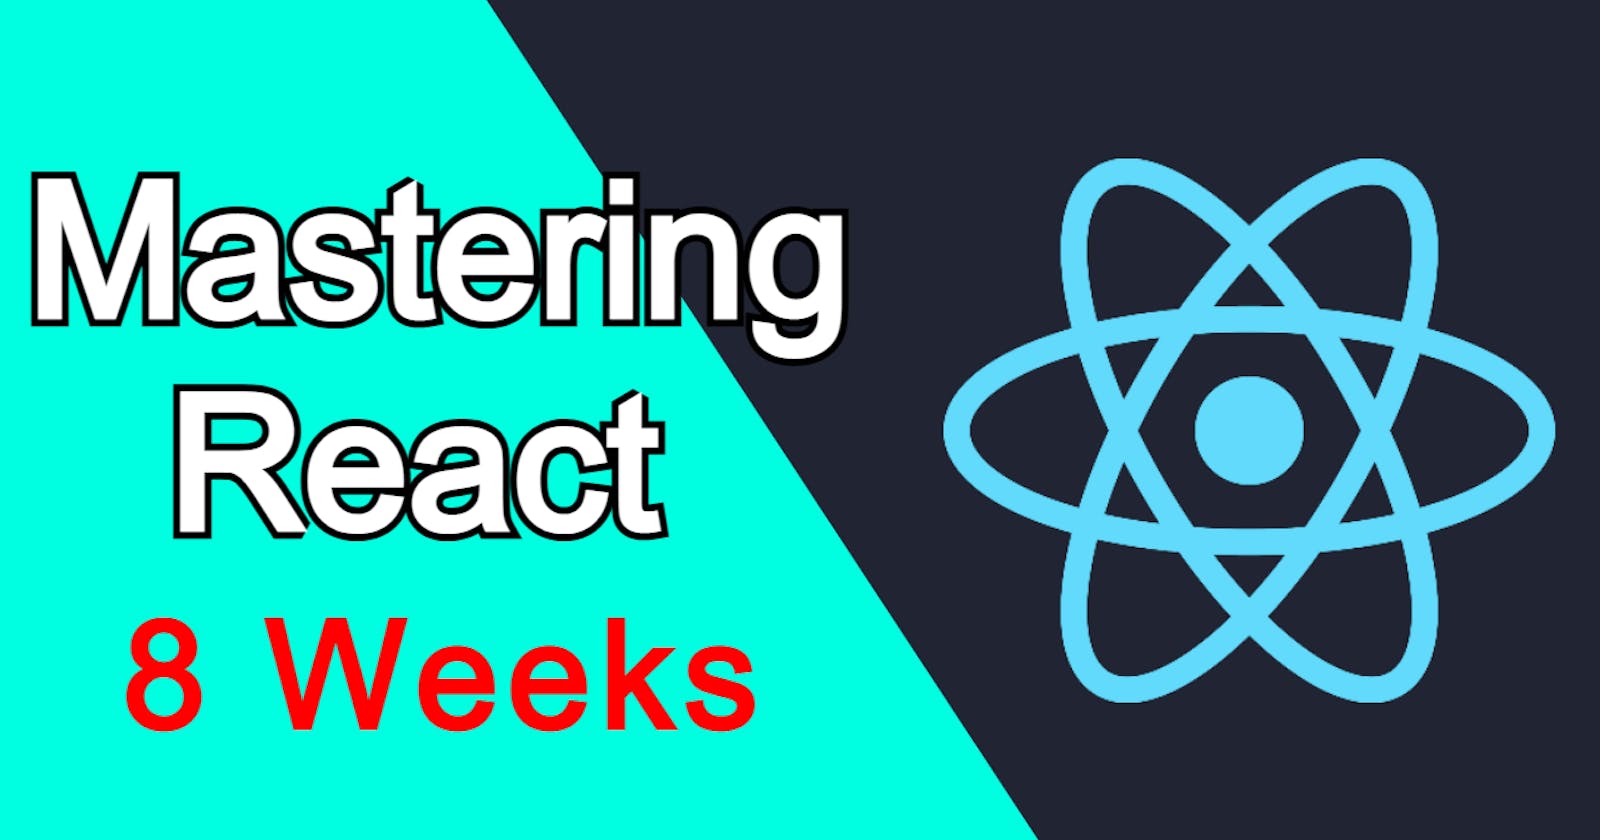 Mastering React in 8 weeks - Day 1